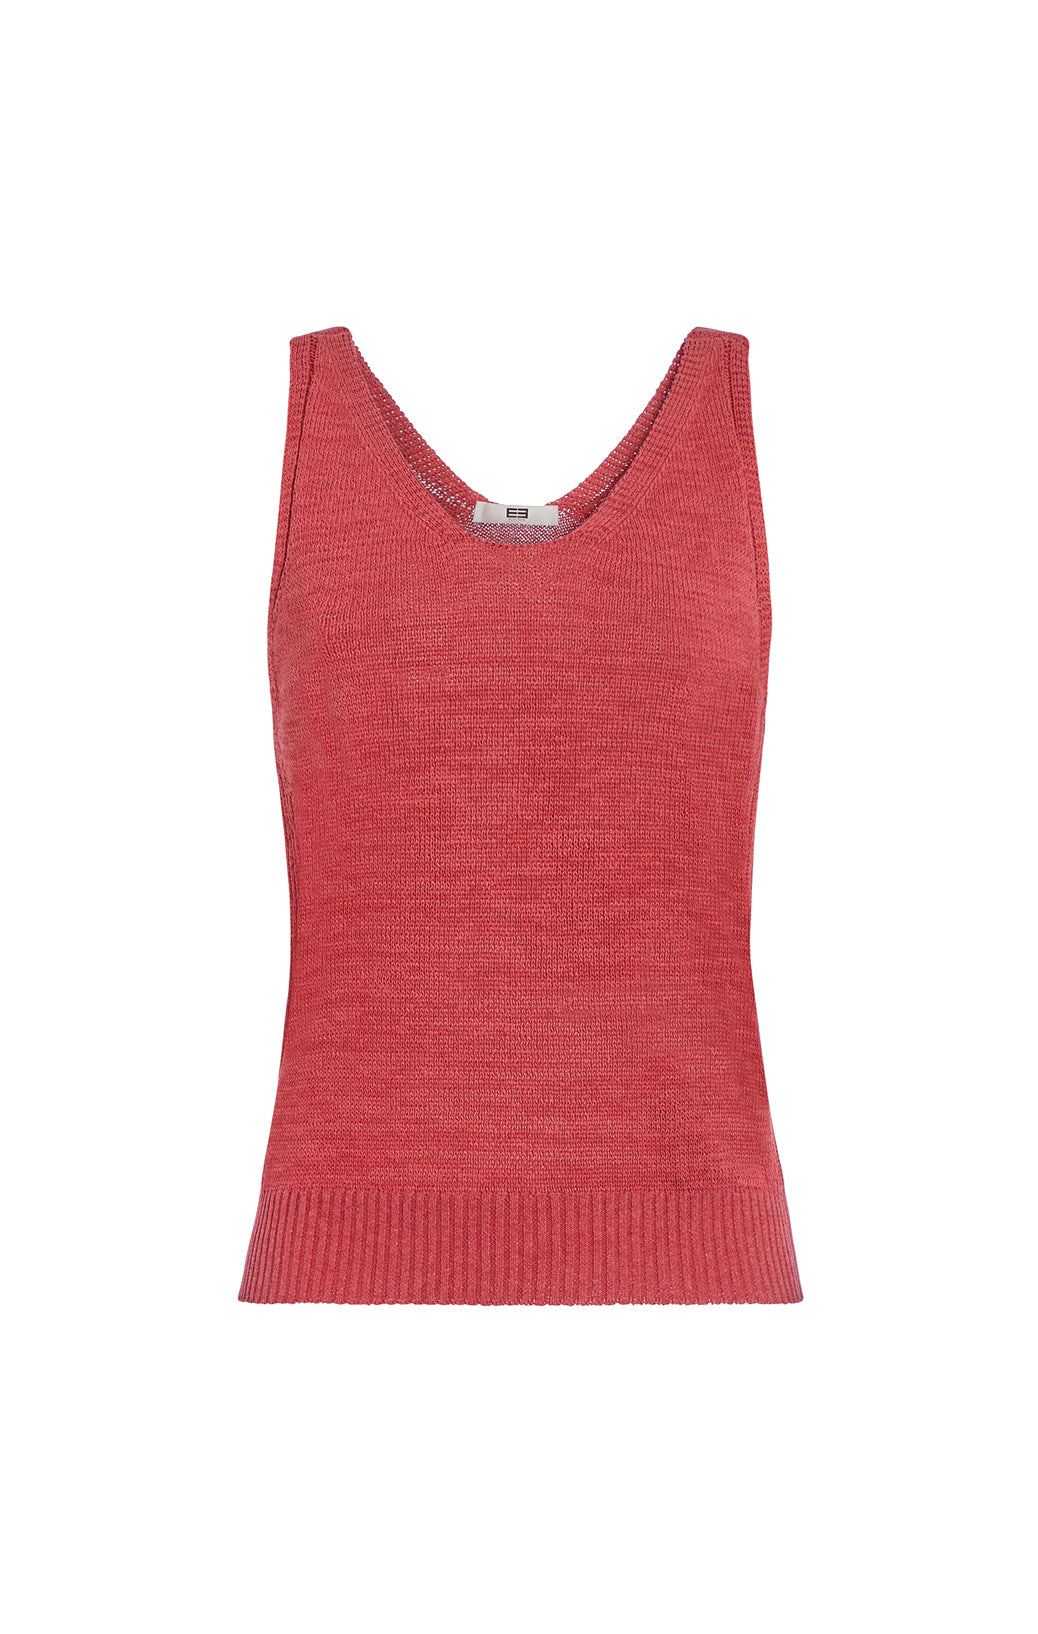 Tuscany-Red - Stretch Cotton Jersey Scoop-Neck Tee - Product Image